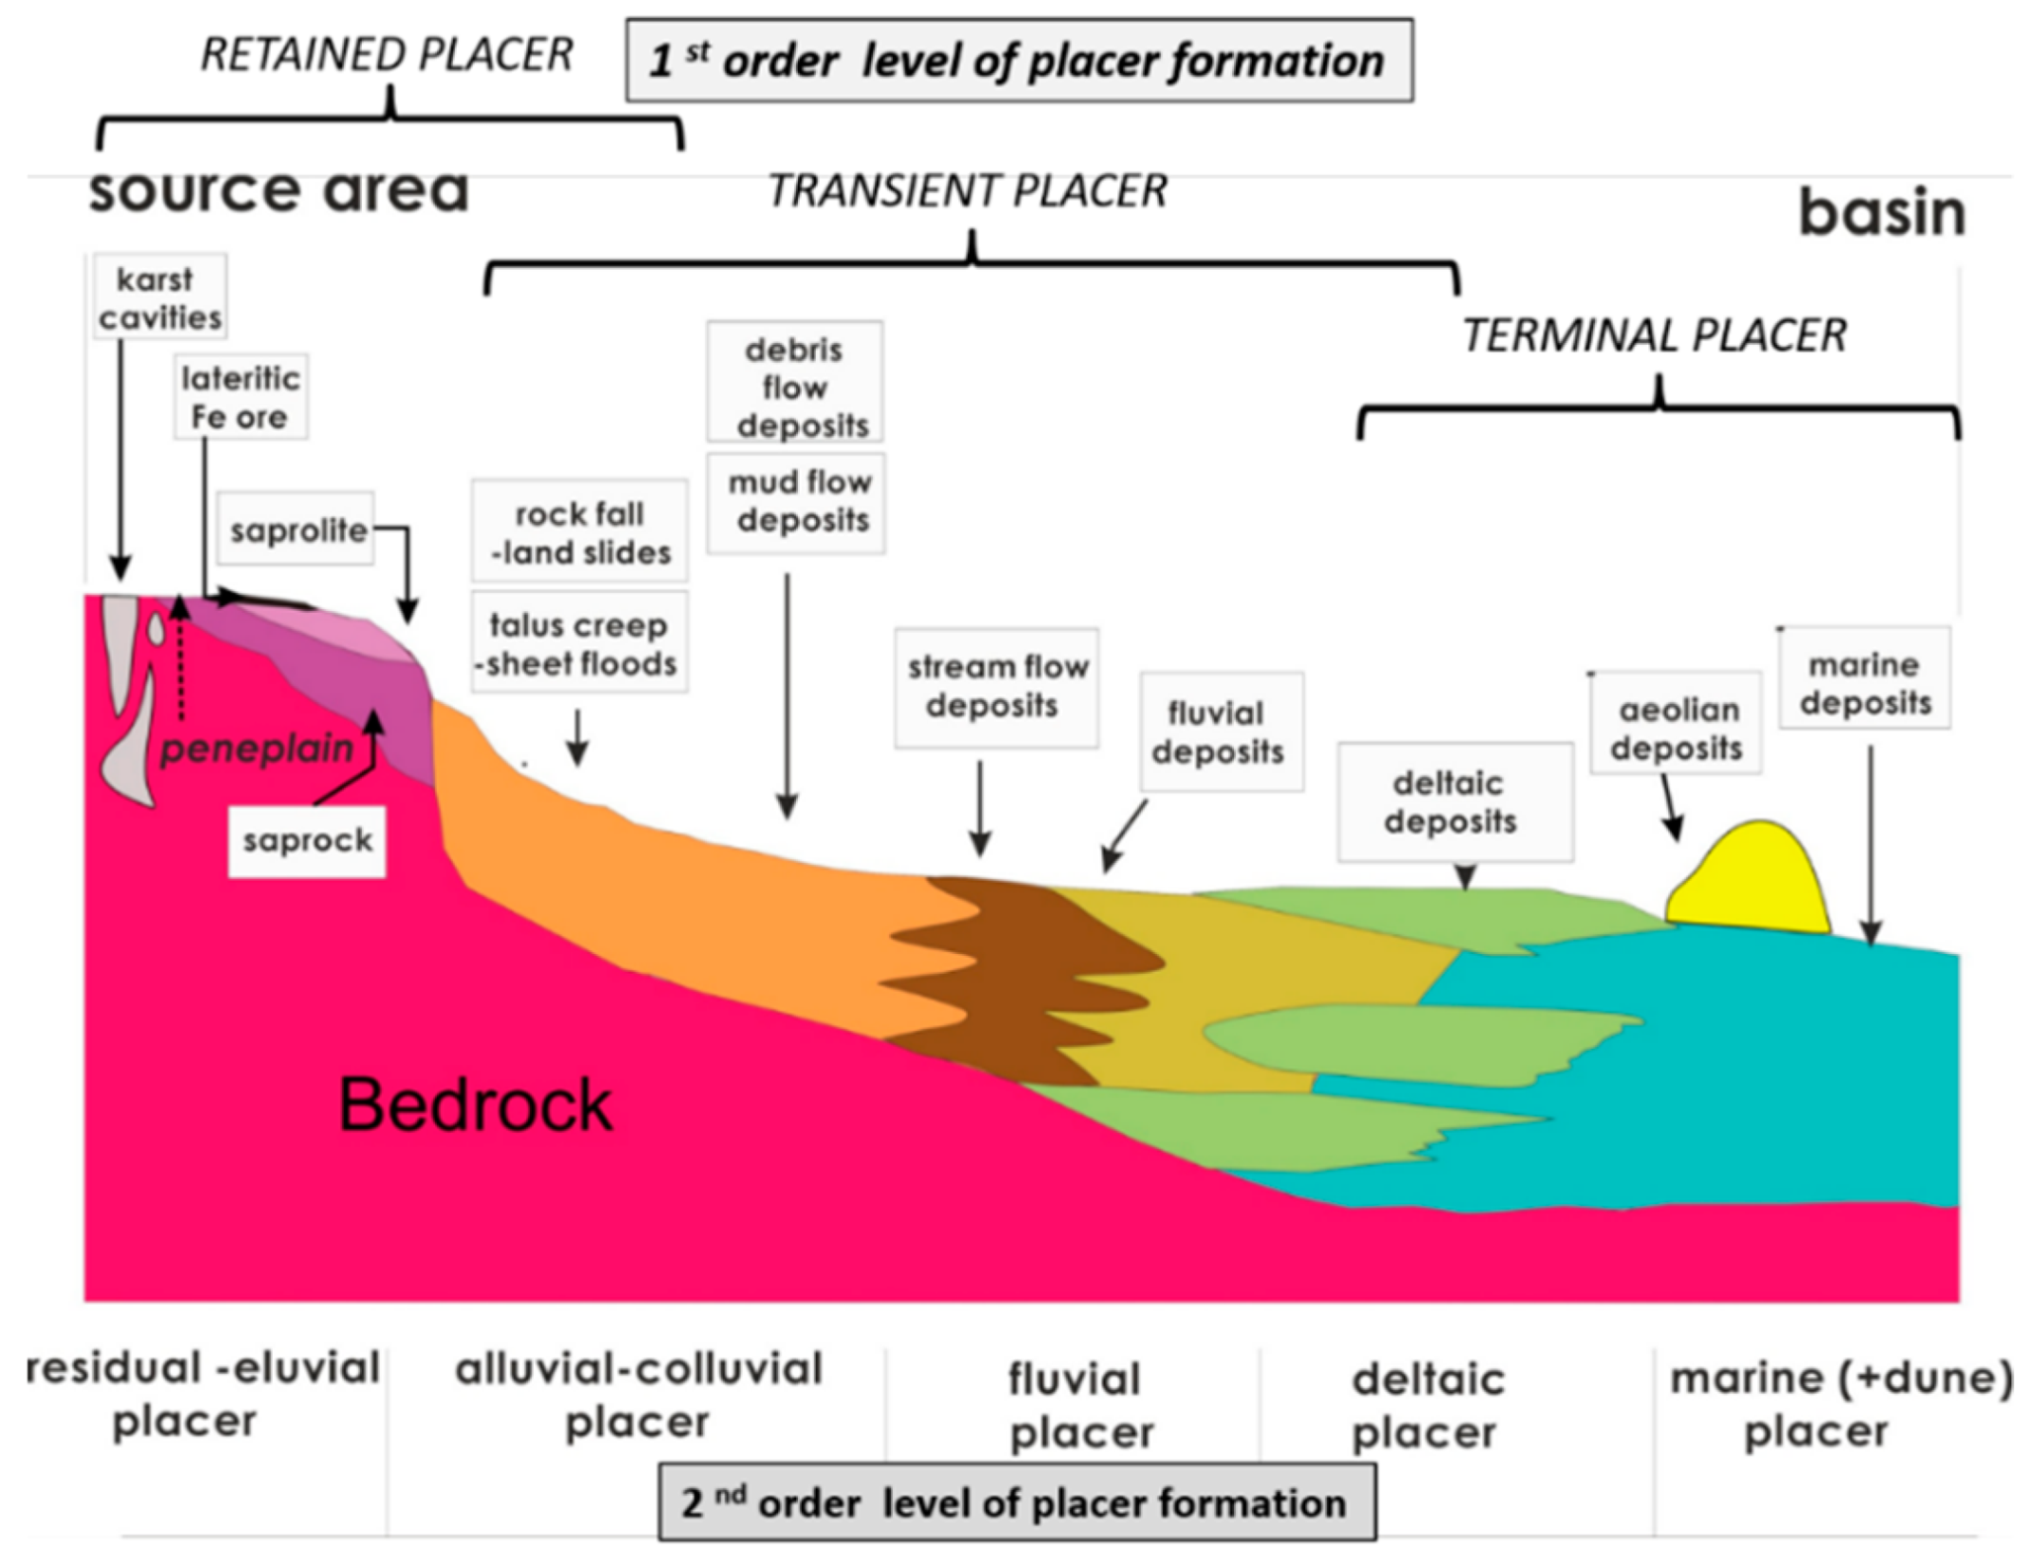 Photographs and scheme of geomorphic features: A, steep-sided wash bank